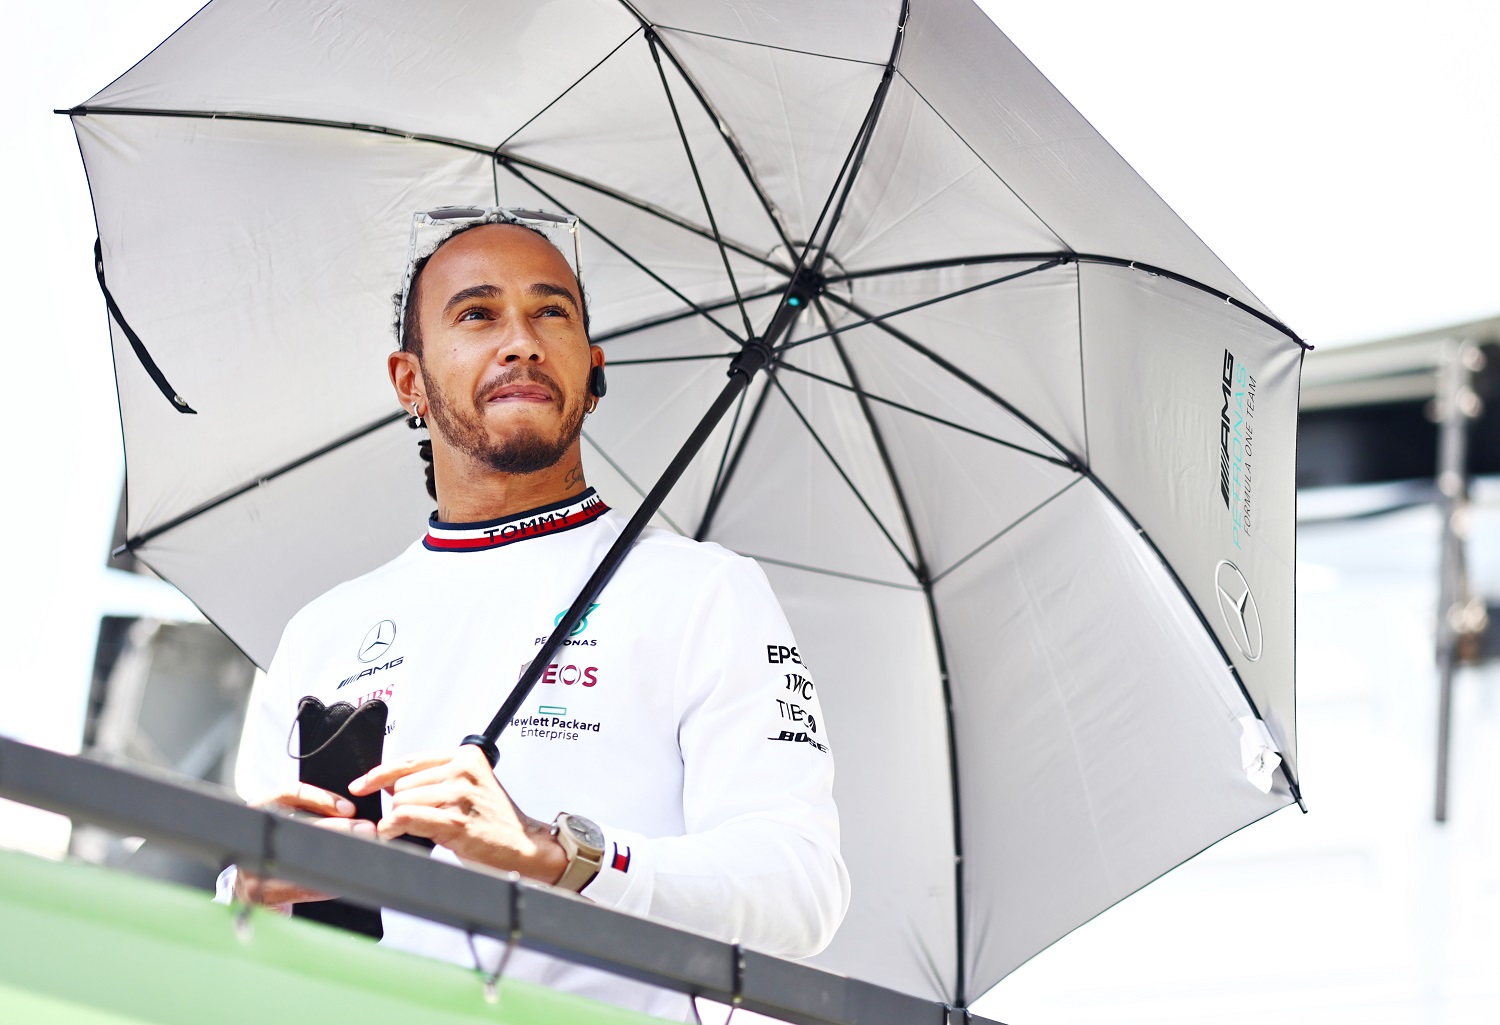 Lewis Hamilton looks on in the paddock prior to the Formula 1 race at Autodromo Jose Carlos Pace on Nov, 14, 2021 in Sao Paulo, Brazil. | Mark Thompson/Getty Images